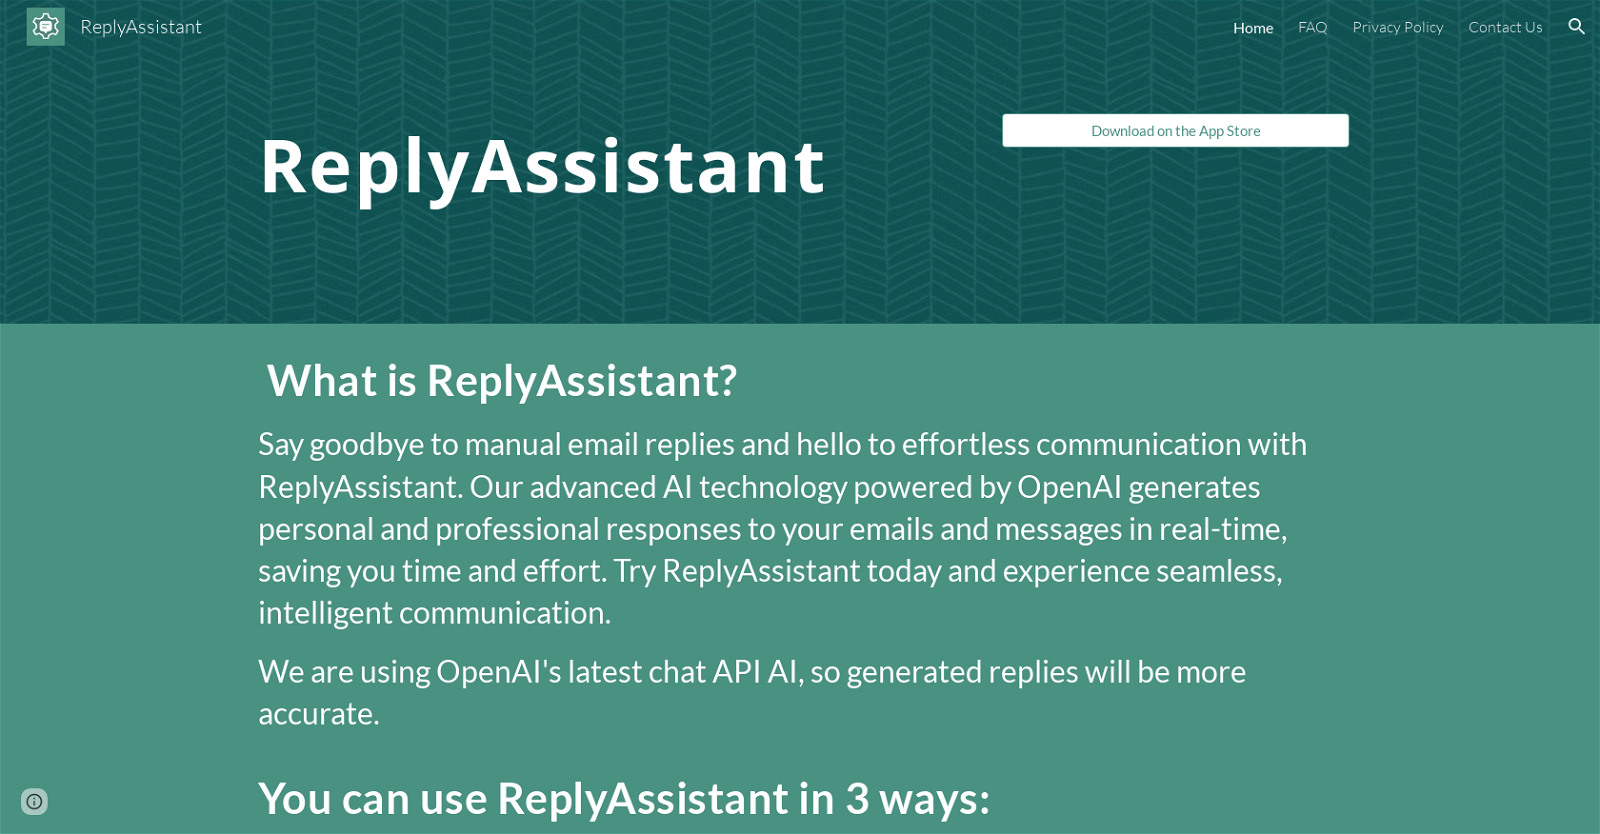 ReplyAssistant